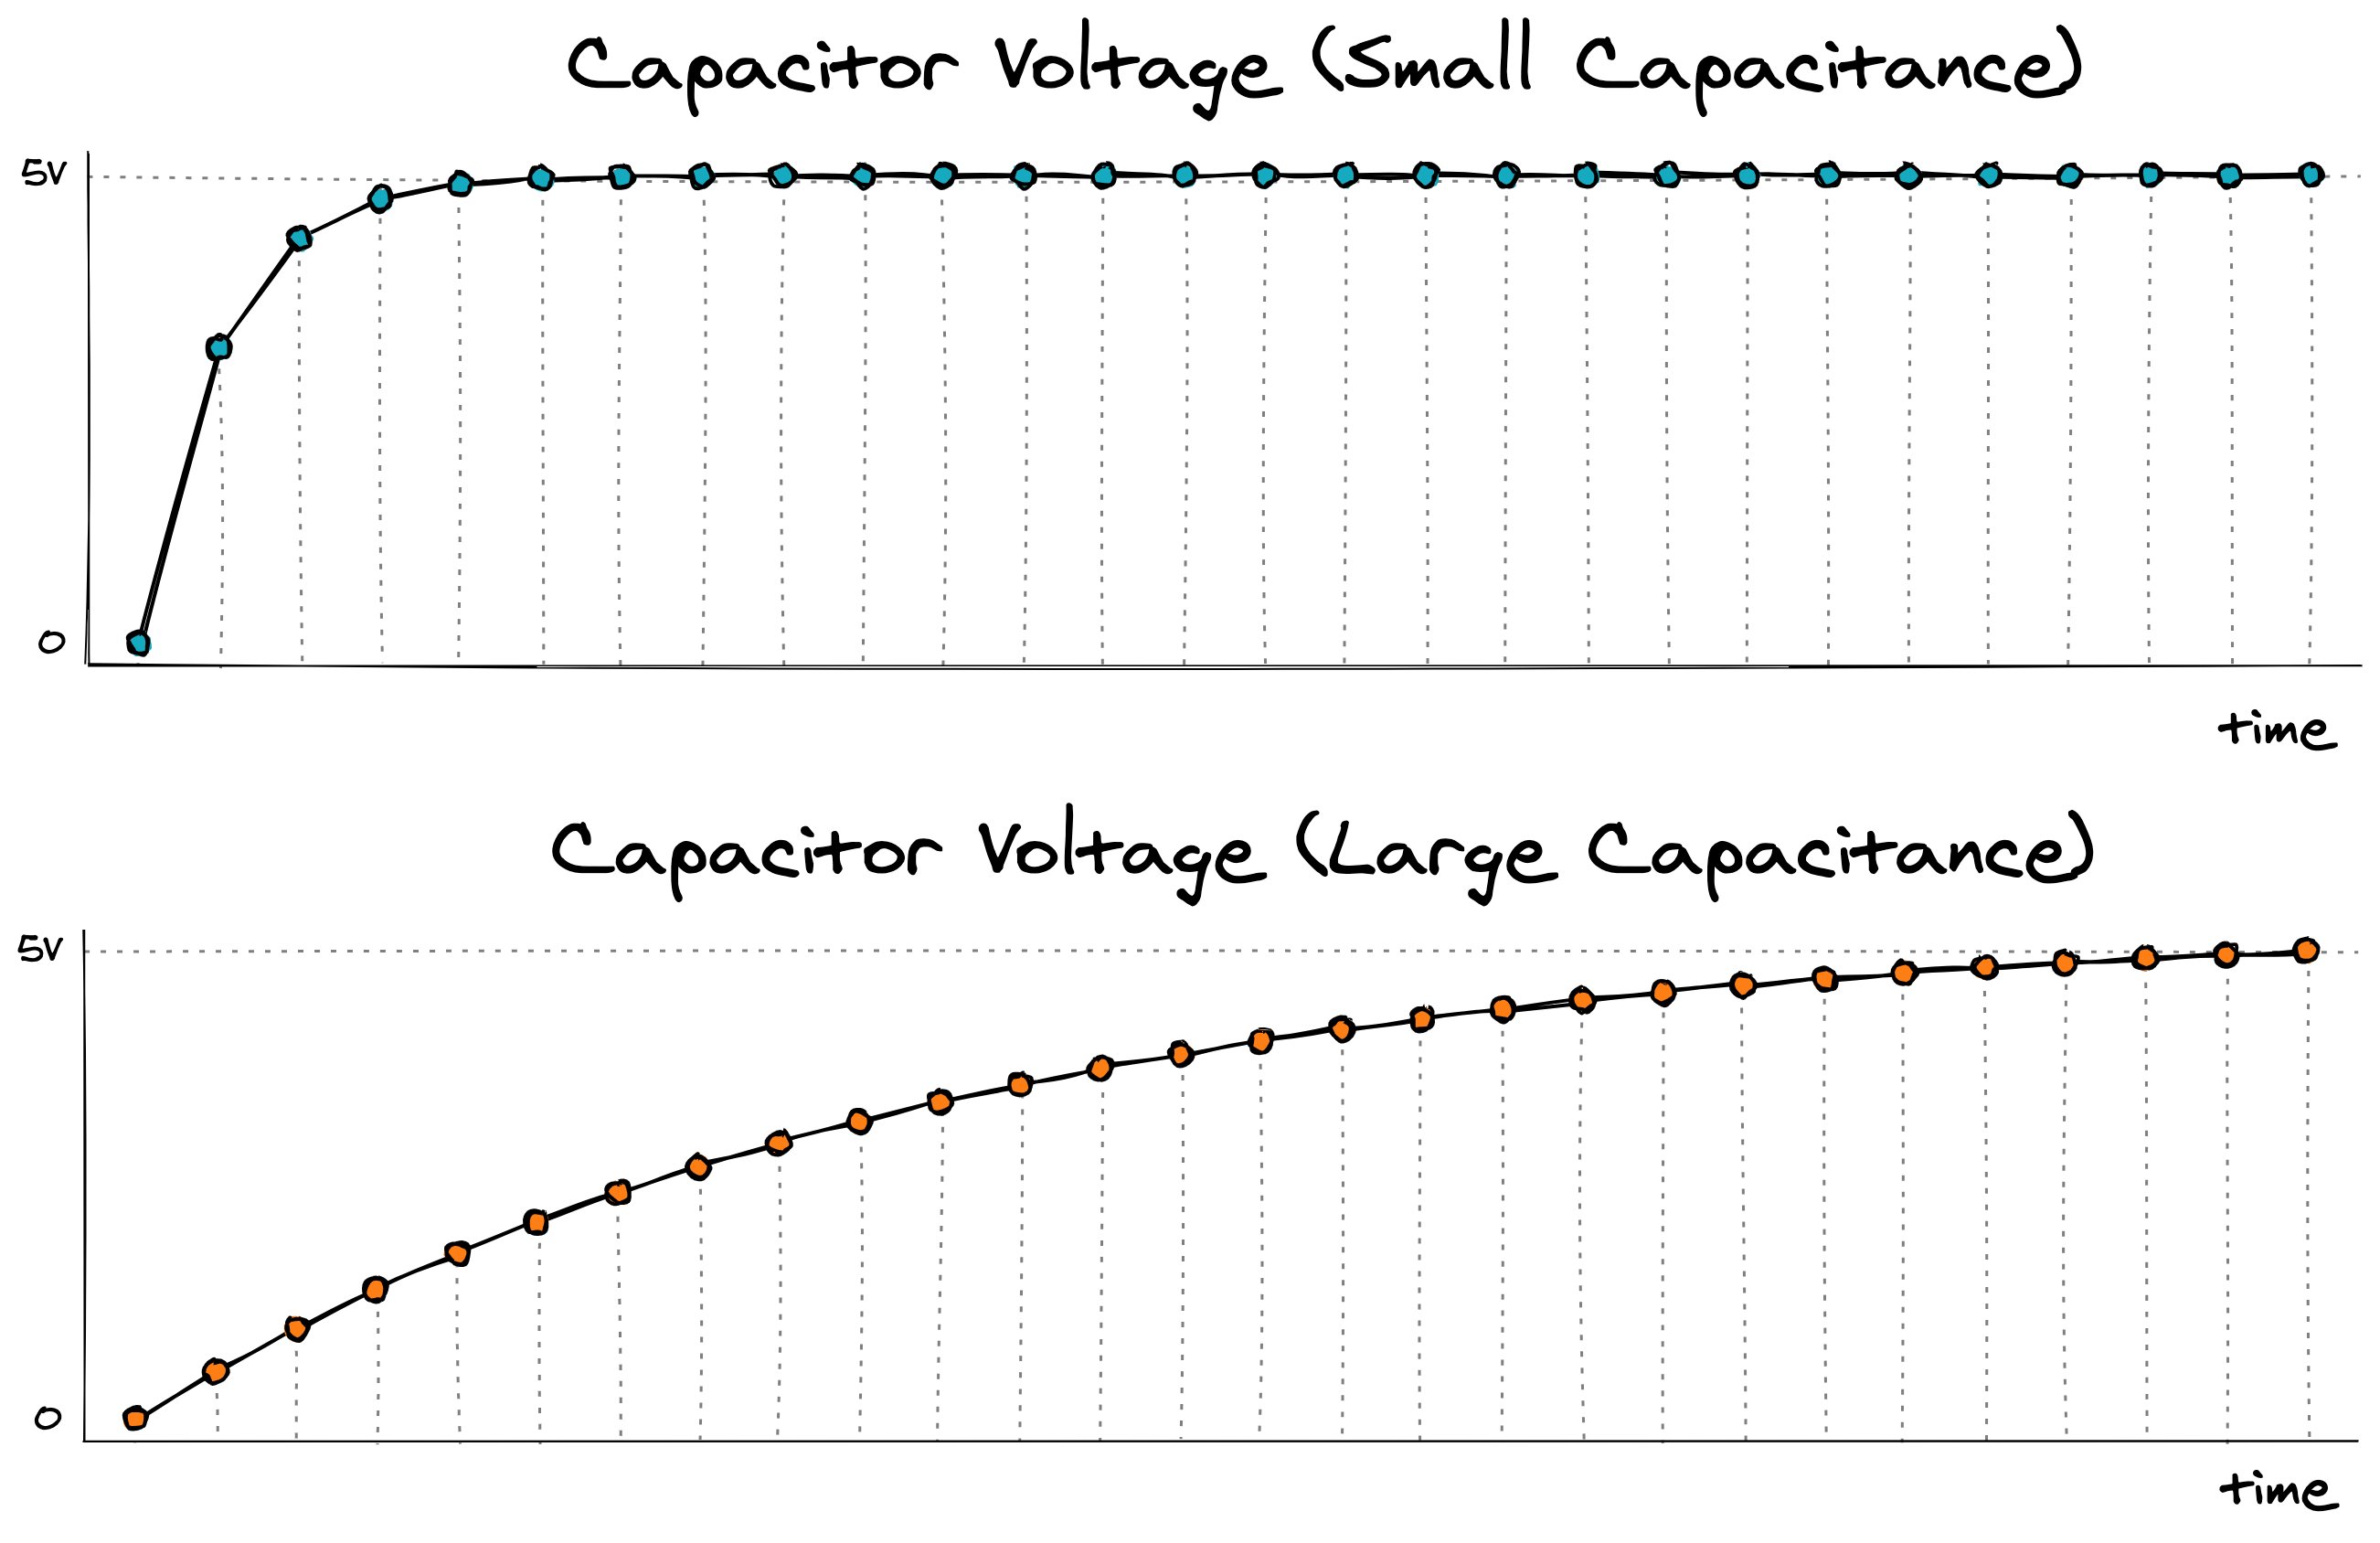 RC charging curves for different capacitance values